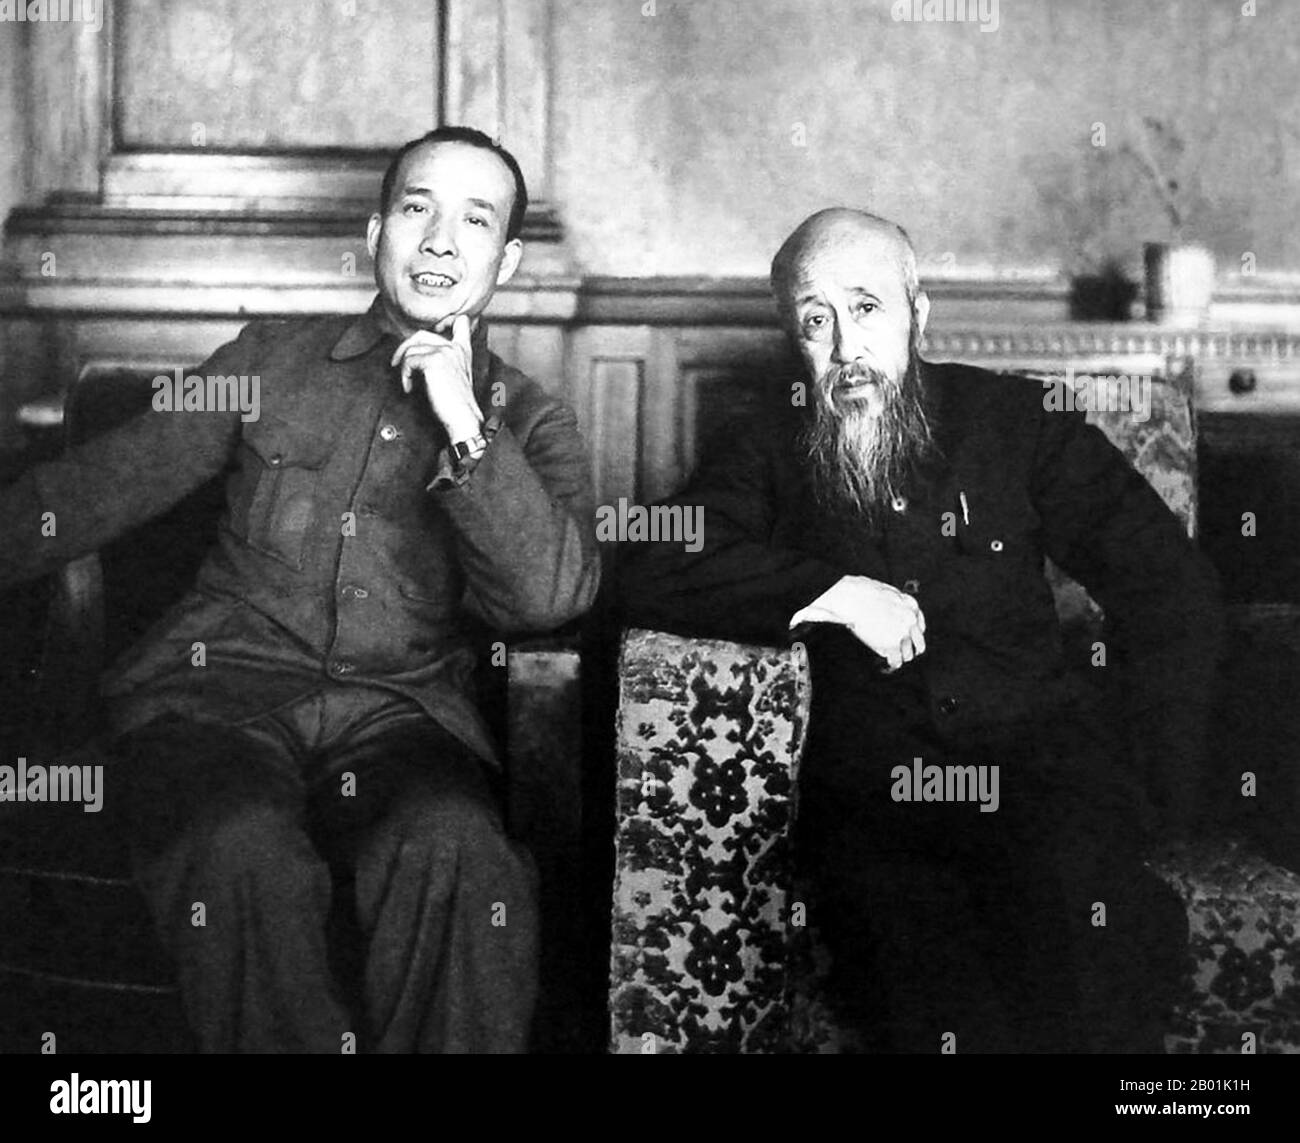 China: Zhou Haiying (27 September 1929 - 7 April 2011, left), the son of celebrated Chinese writer Lu Xun, together with Shen Junru (2 January 1875 - 11 June 1963), first President of the Supreme People's Court of China, Shenyang, 1949.  Shen Junru was a Chinese lawyer, political figure and the first President of the Supreme People's Court of China in the People's Republic of China.  He was born in Suzhou, Jiangsu Province, with family ancestry in Jiaxing, Zhejiang Province during the late Qing Dynasty. He received the Jinshi or 'presented scholar' degree, the highest under the imperial exams. Stock Photo